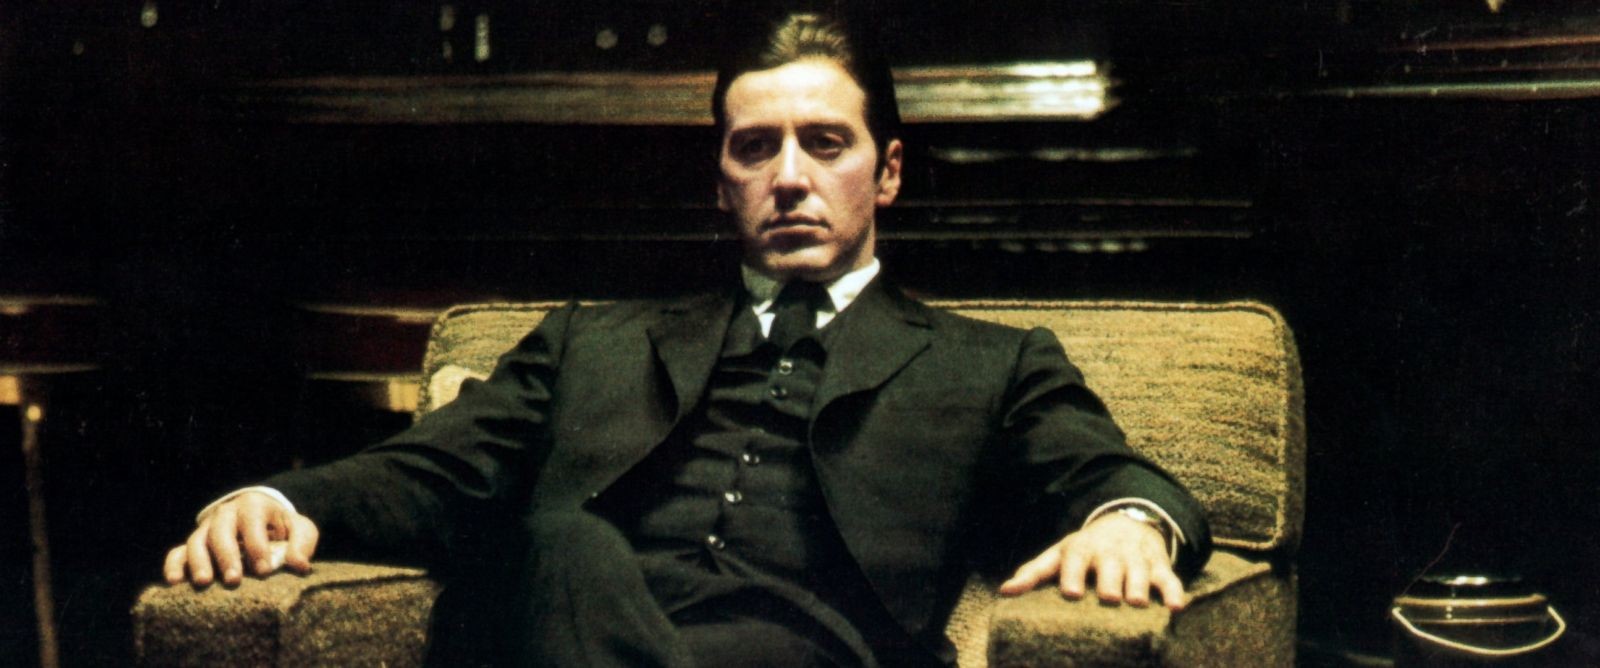 Michael Corleone's black suit in The Godfather